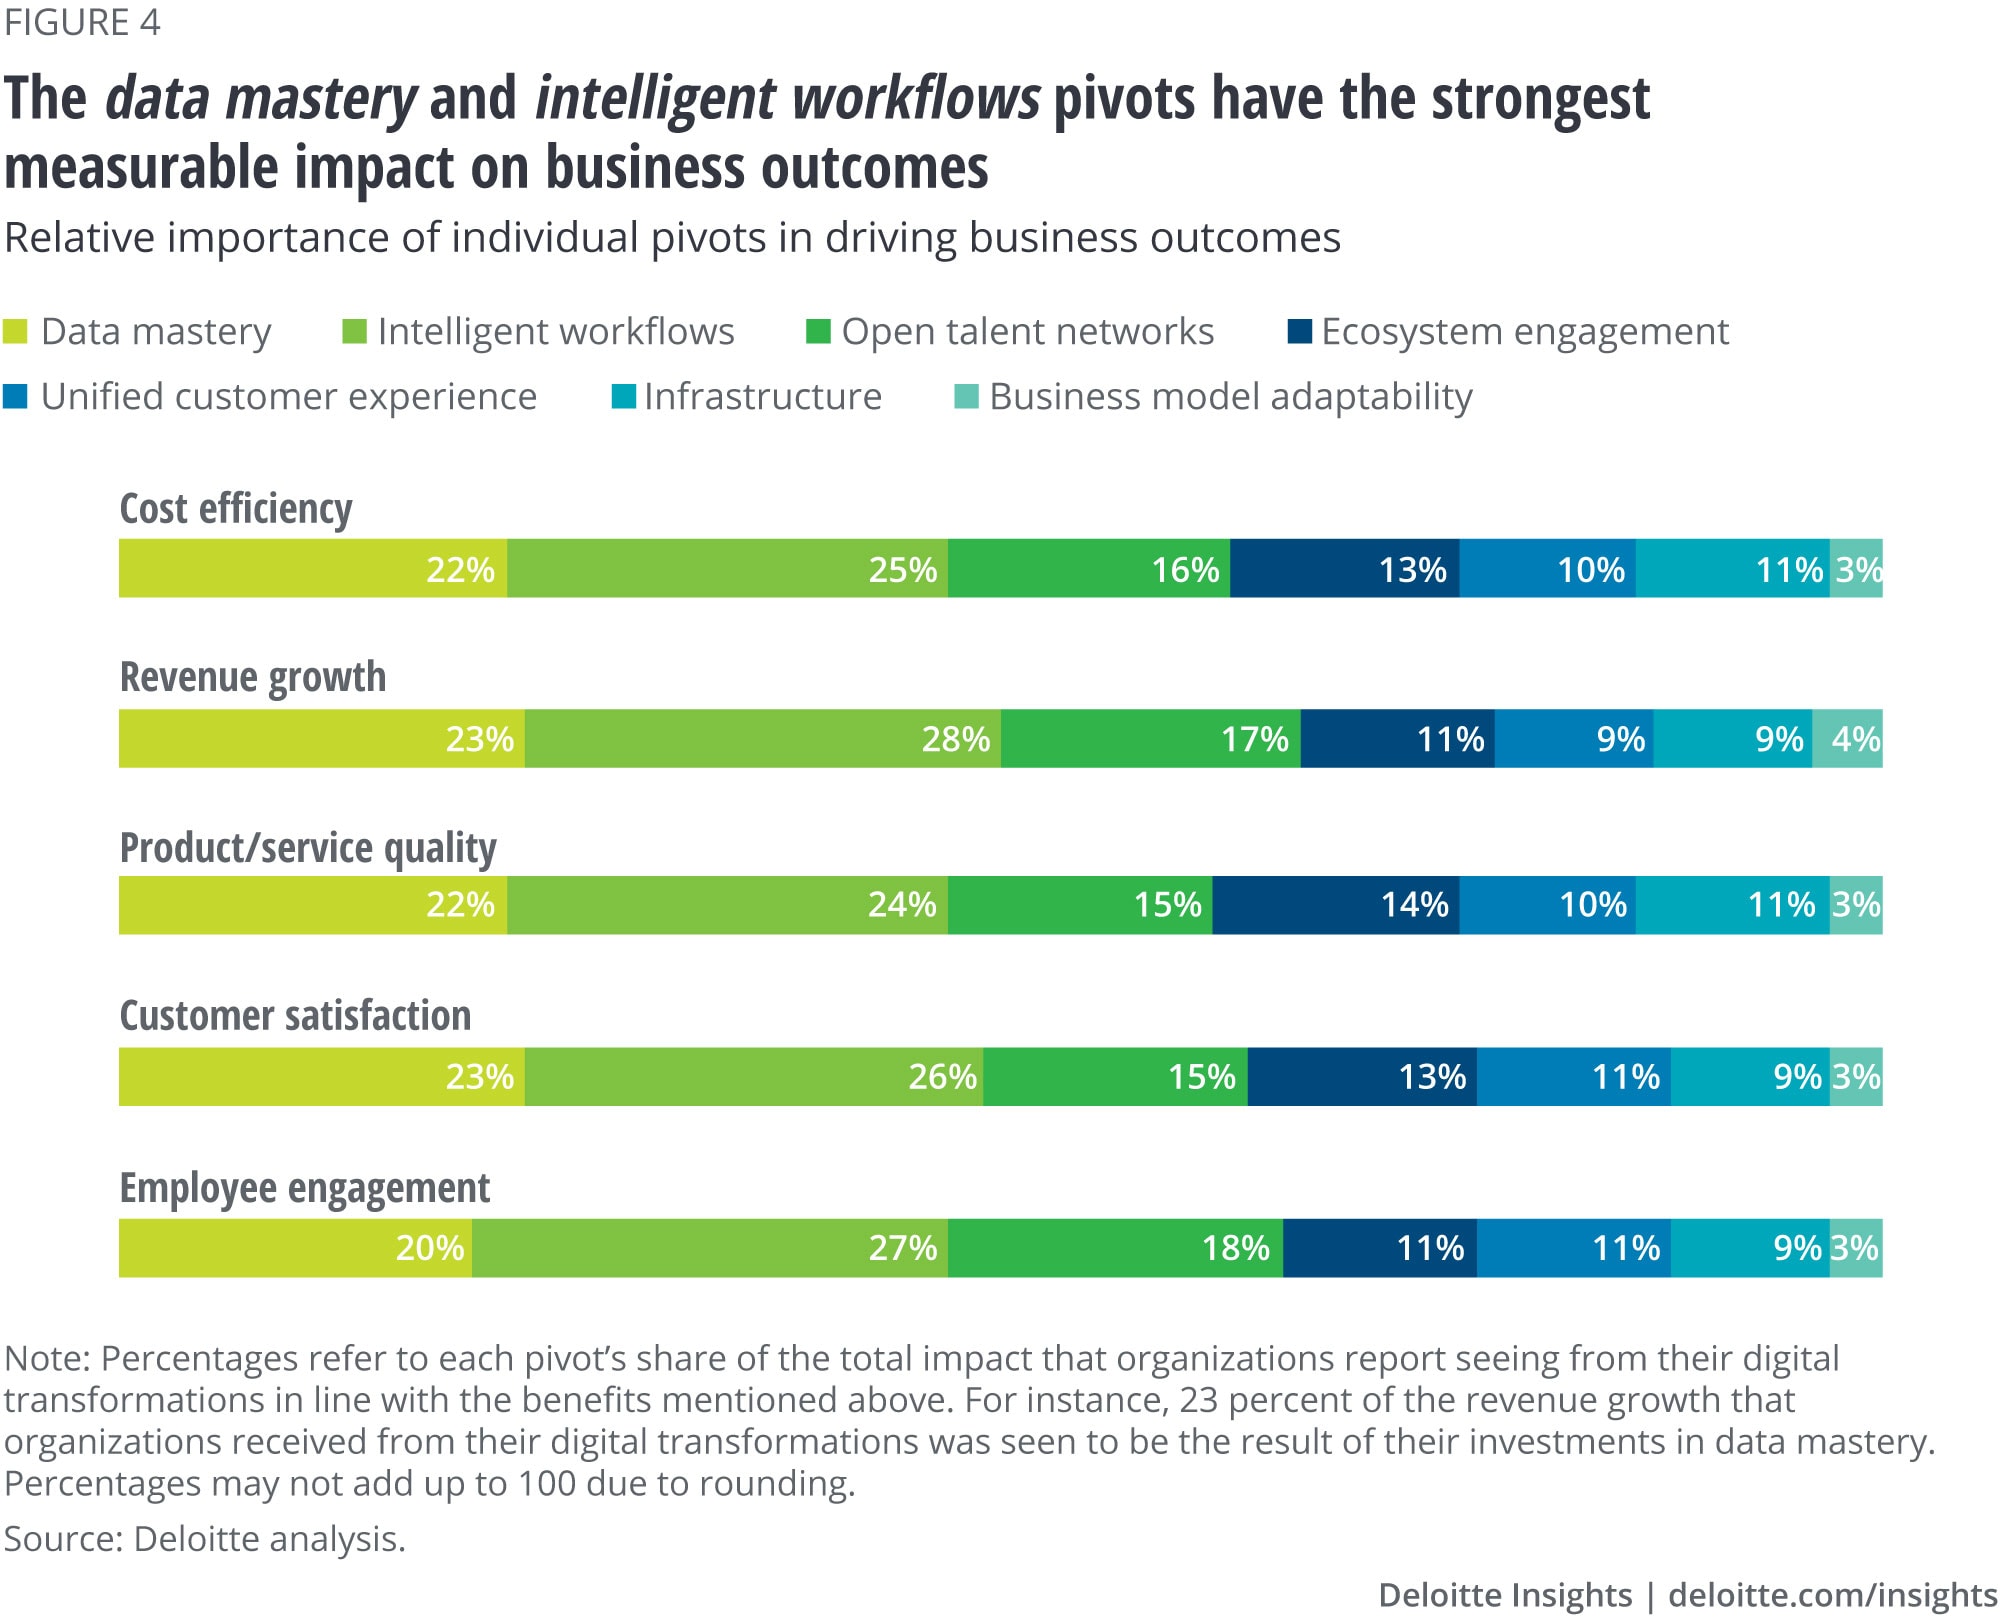 The data mastery and intelligent workflows pivots have the strongest impact on business outcomes